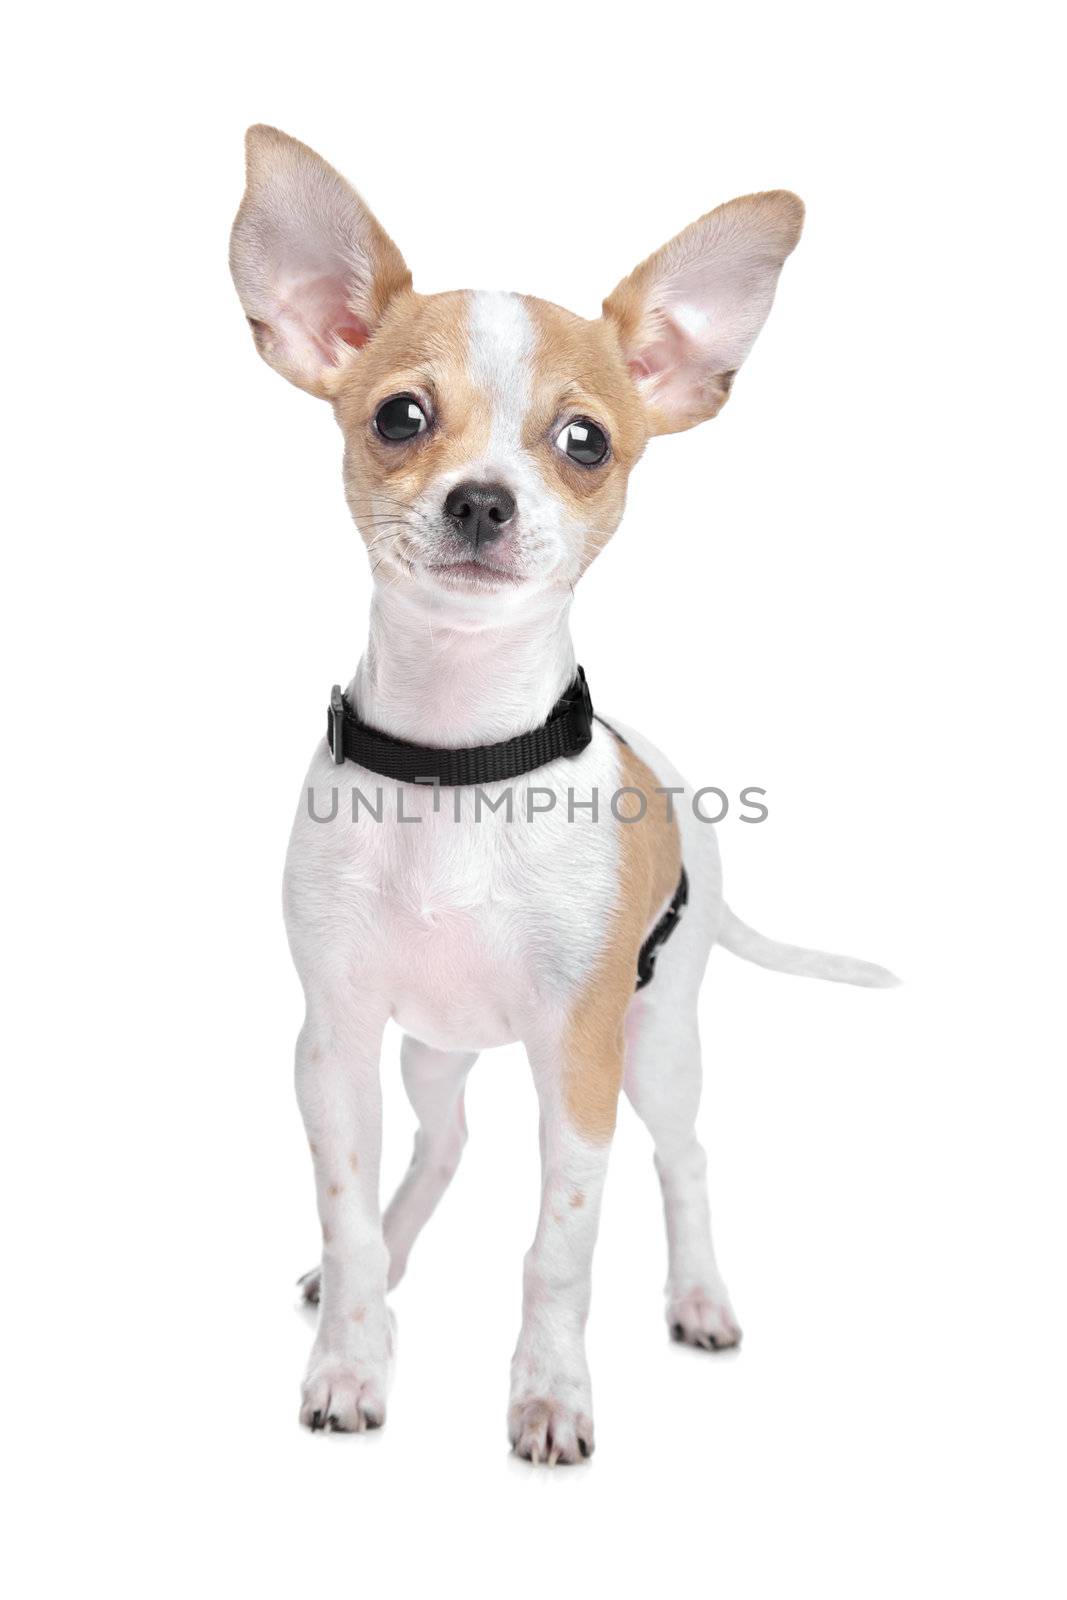 Short haired chihuahua by eriklam